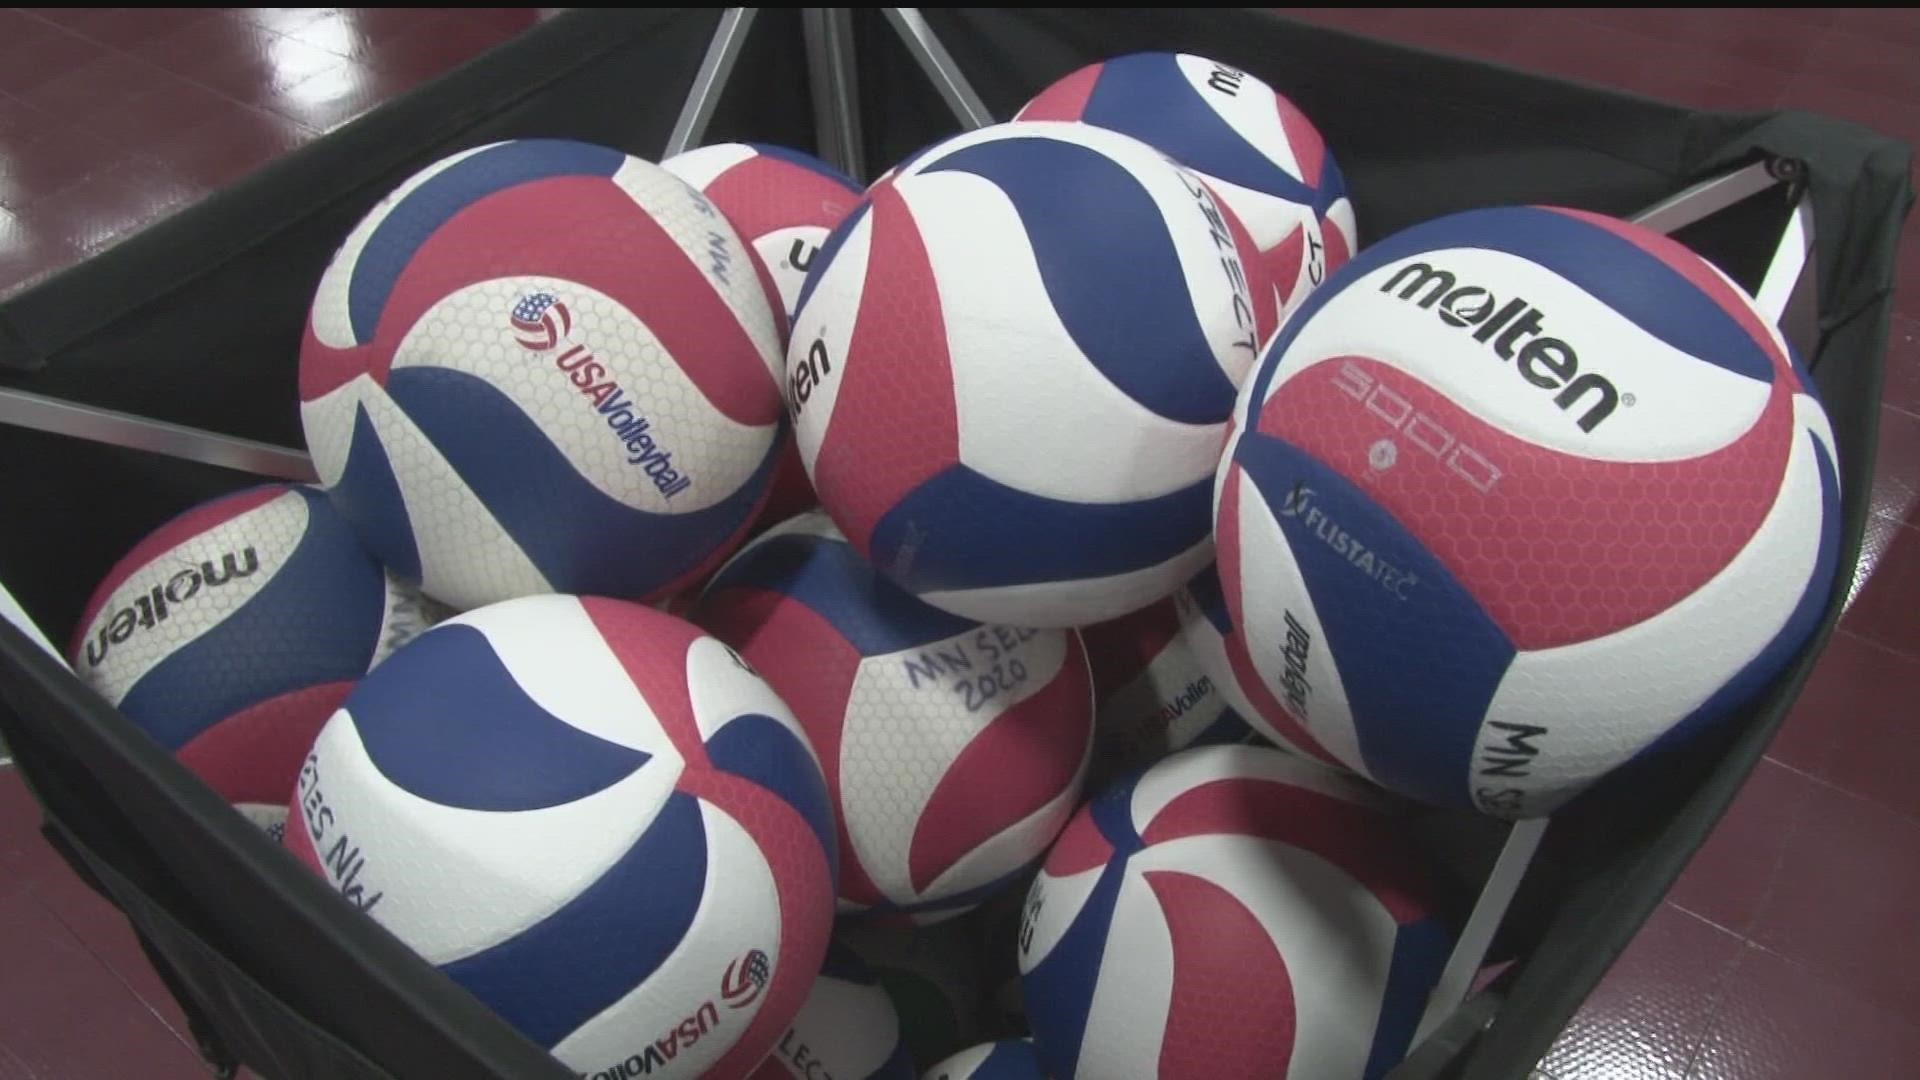 The Minnesota Boys High School Volleyball Association called the decision "a disservice to students."